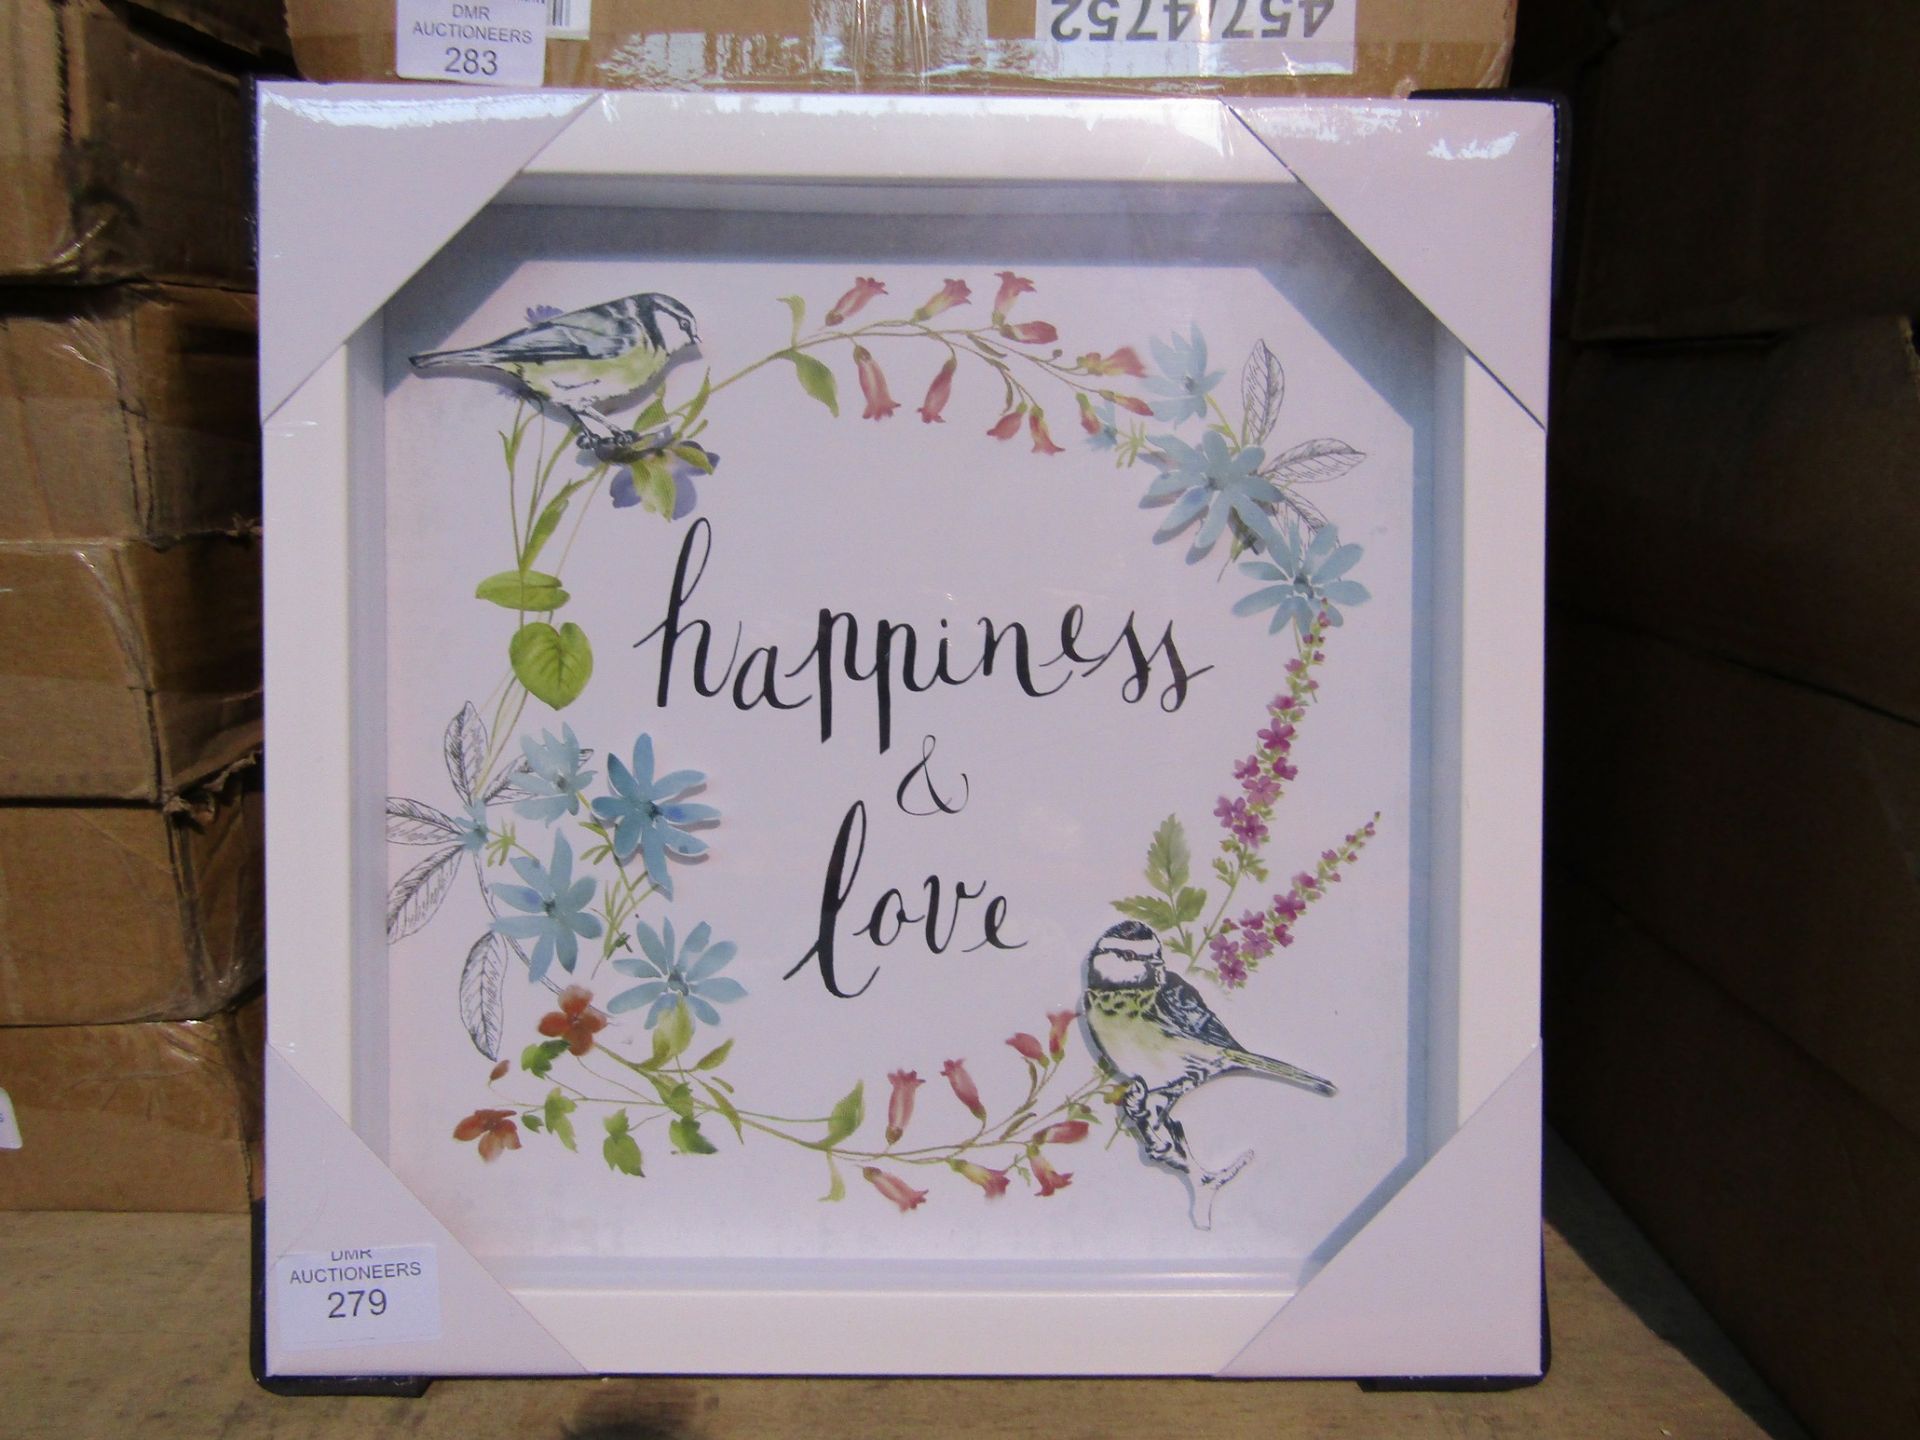 1 BRAND NEW BOXED ARTHOUSE HAPPINESS AND LOVE FRAMED CANVAS